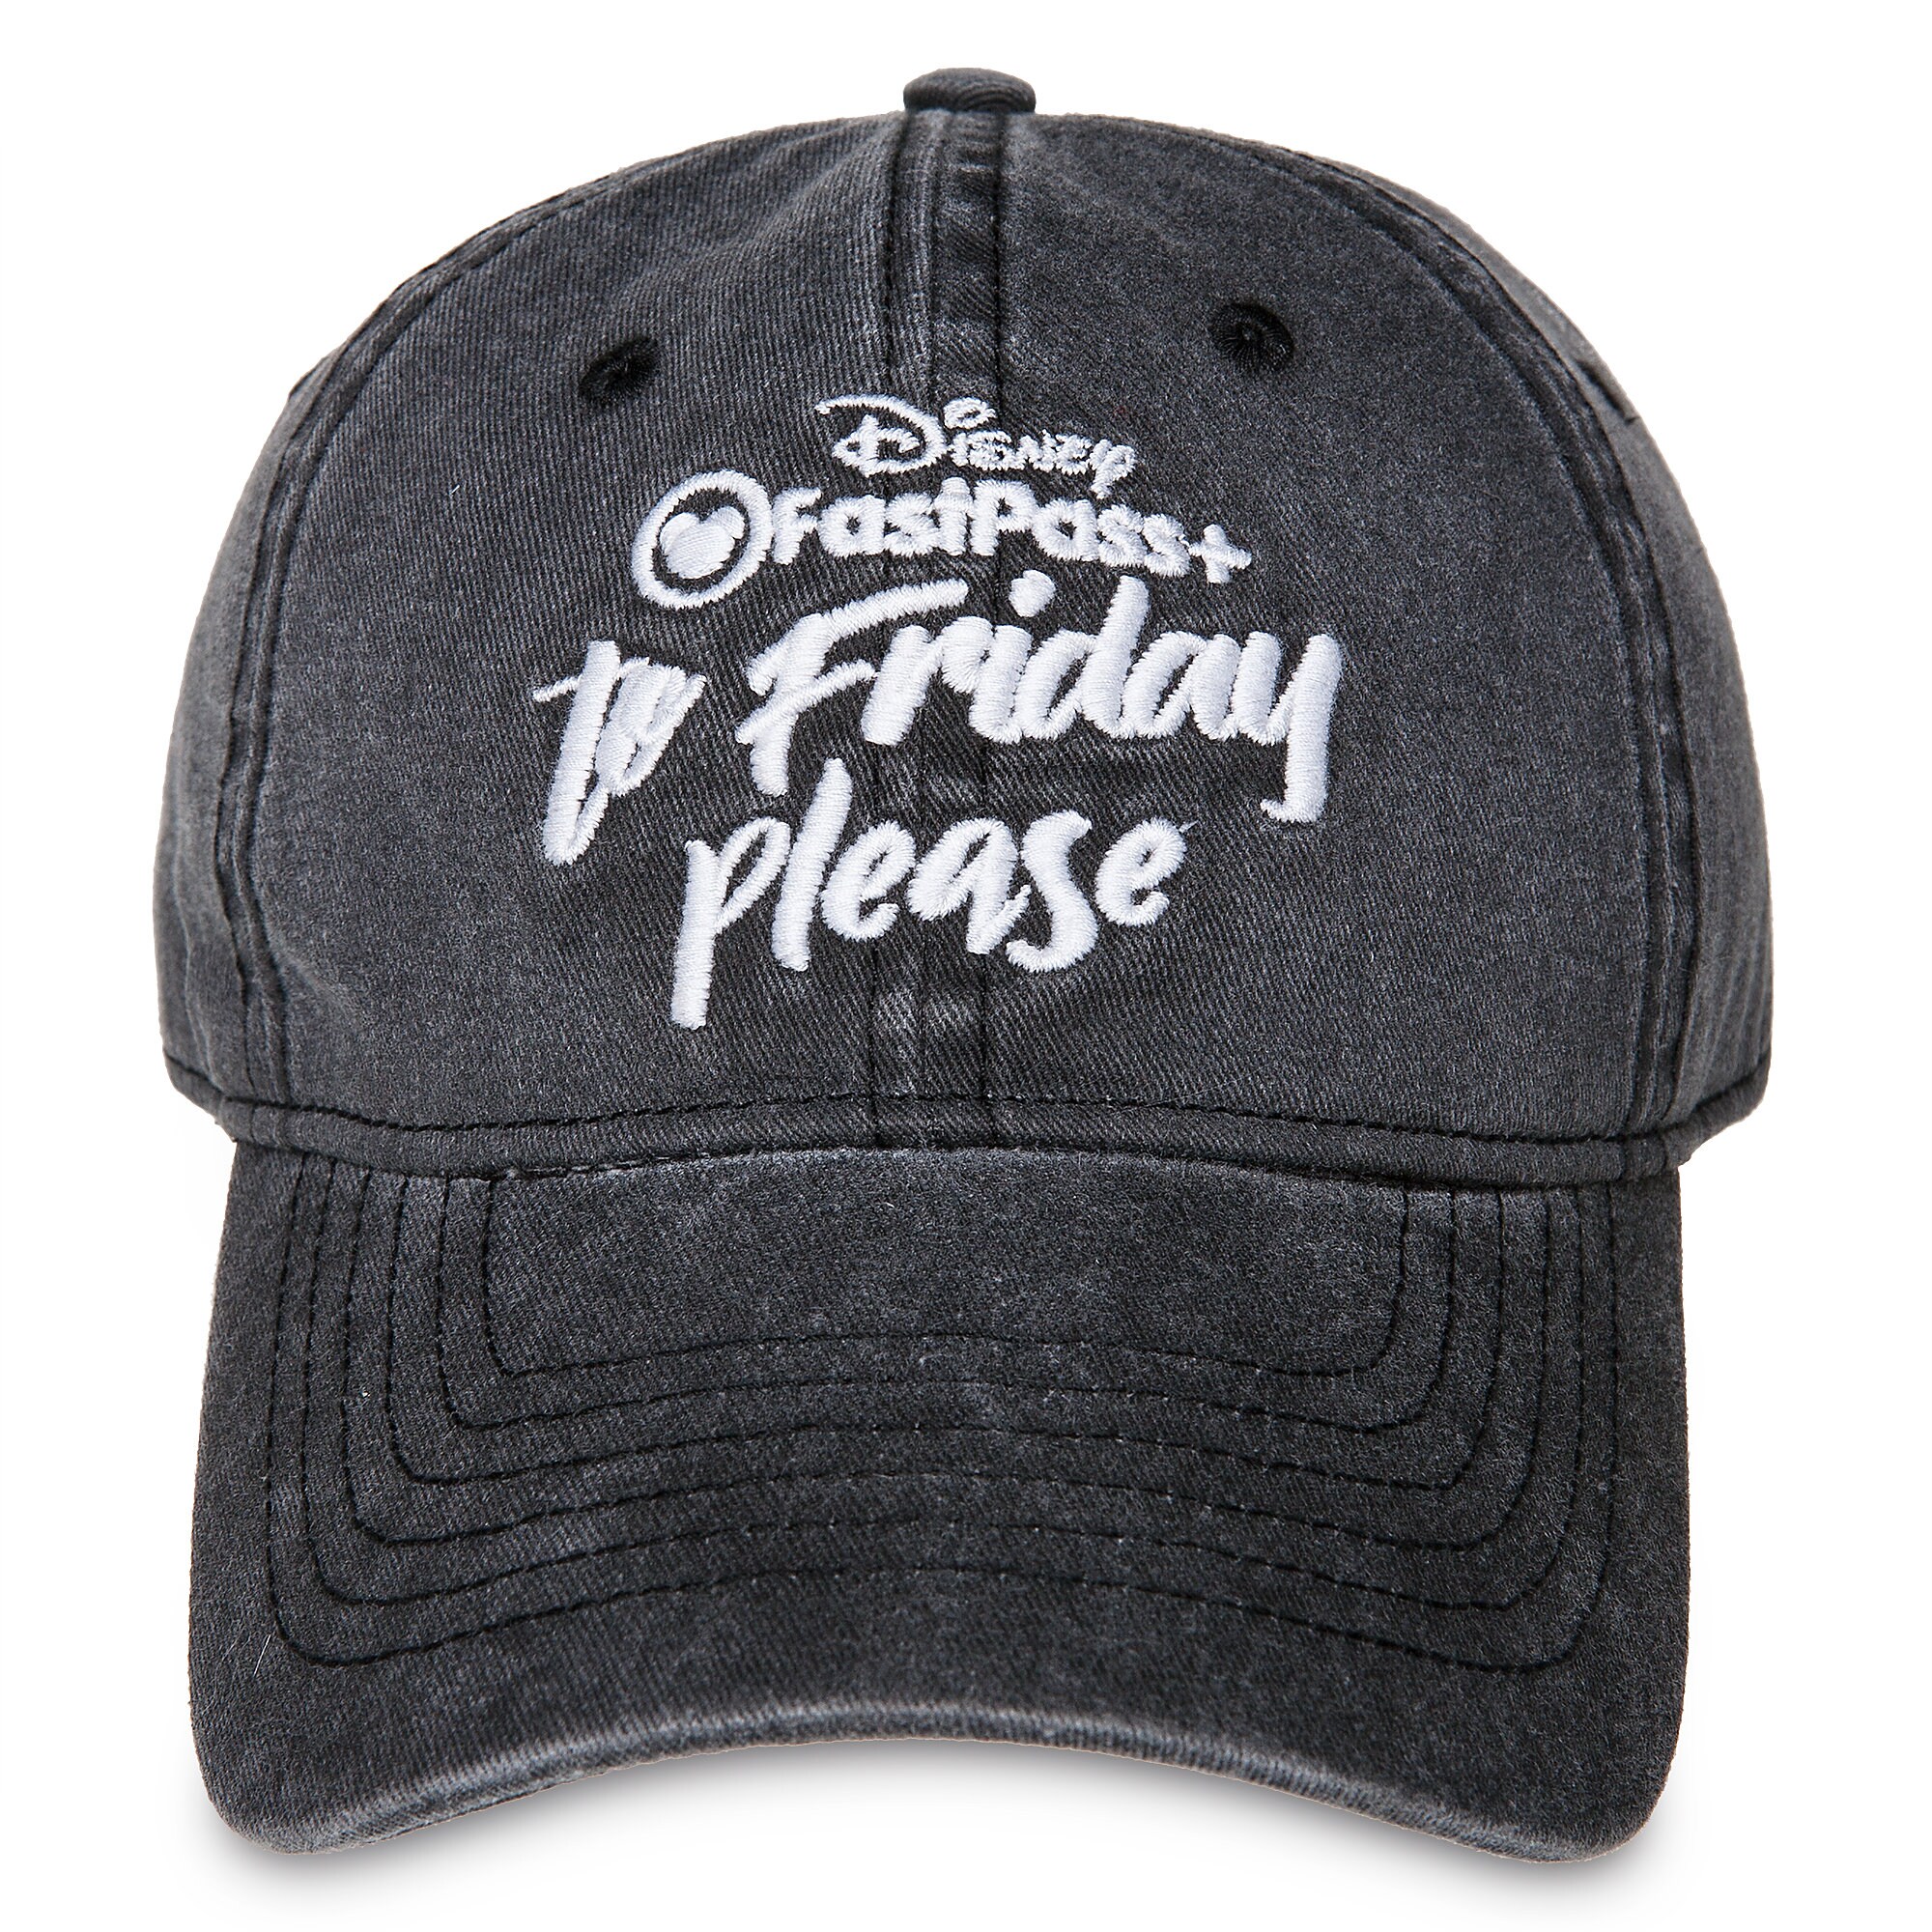 Disney Parks ''Fastpass to Friday'' Baseball Cap for Adults